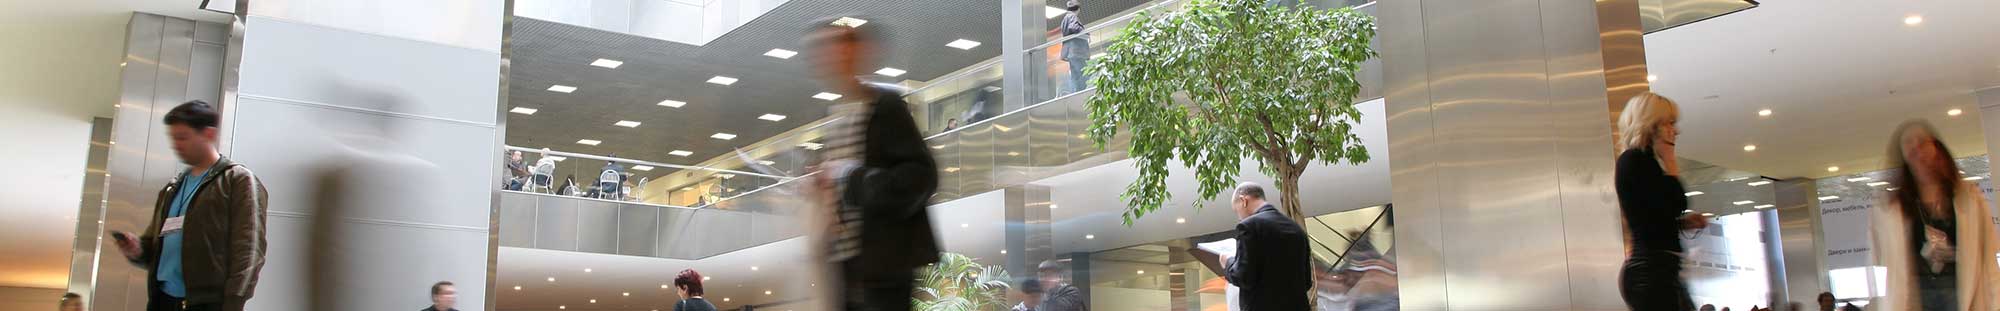 business people walking in a building lobby